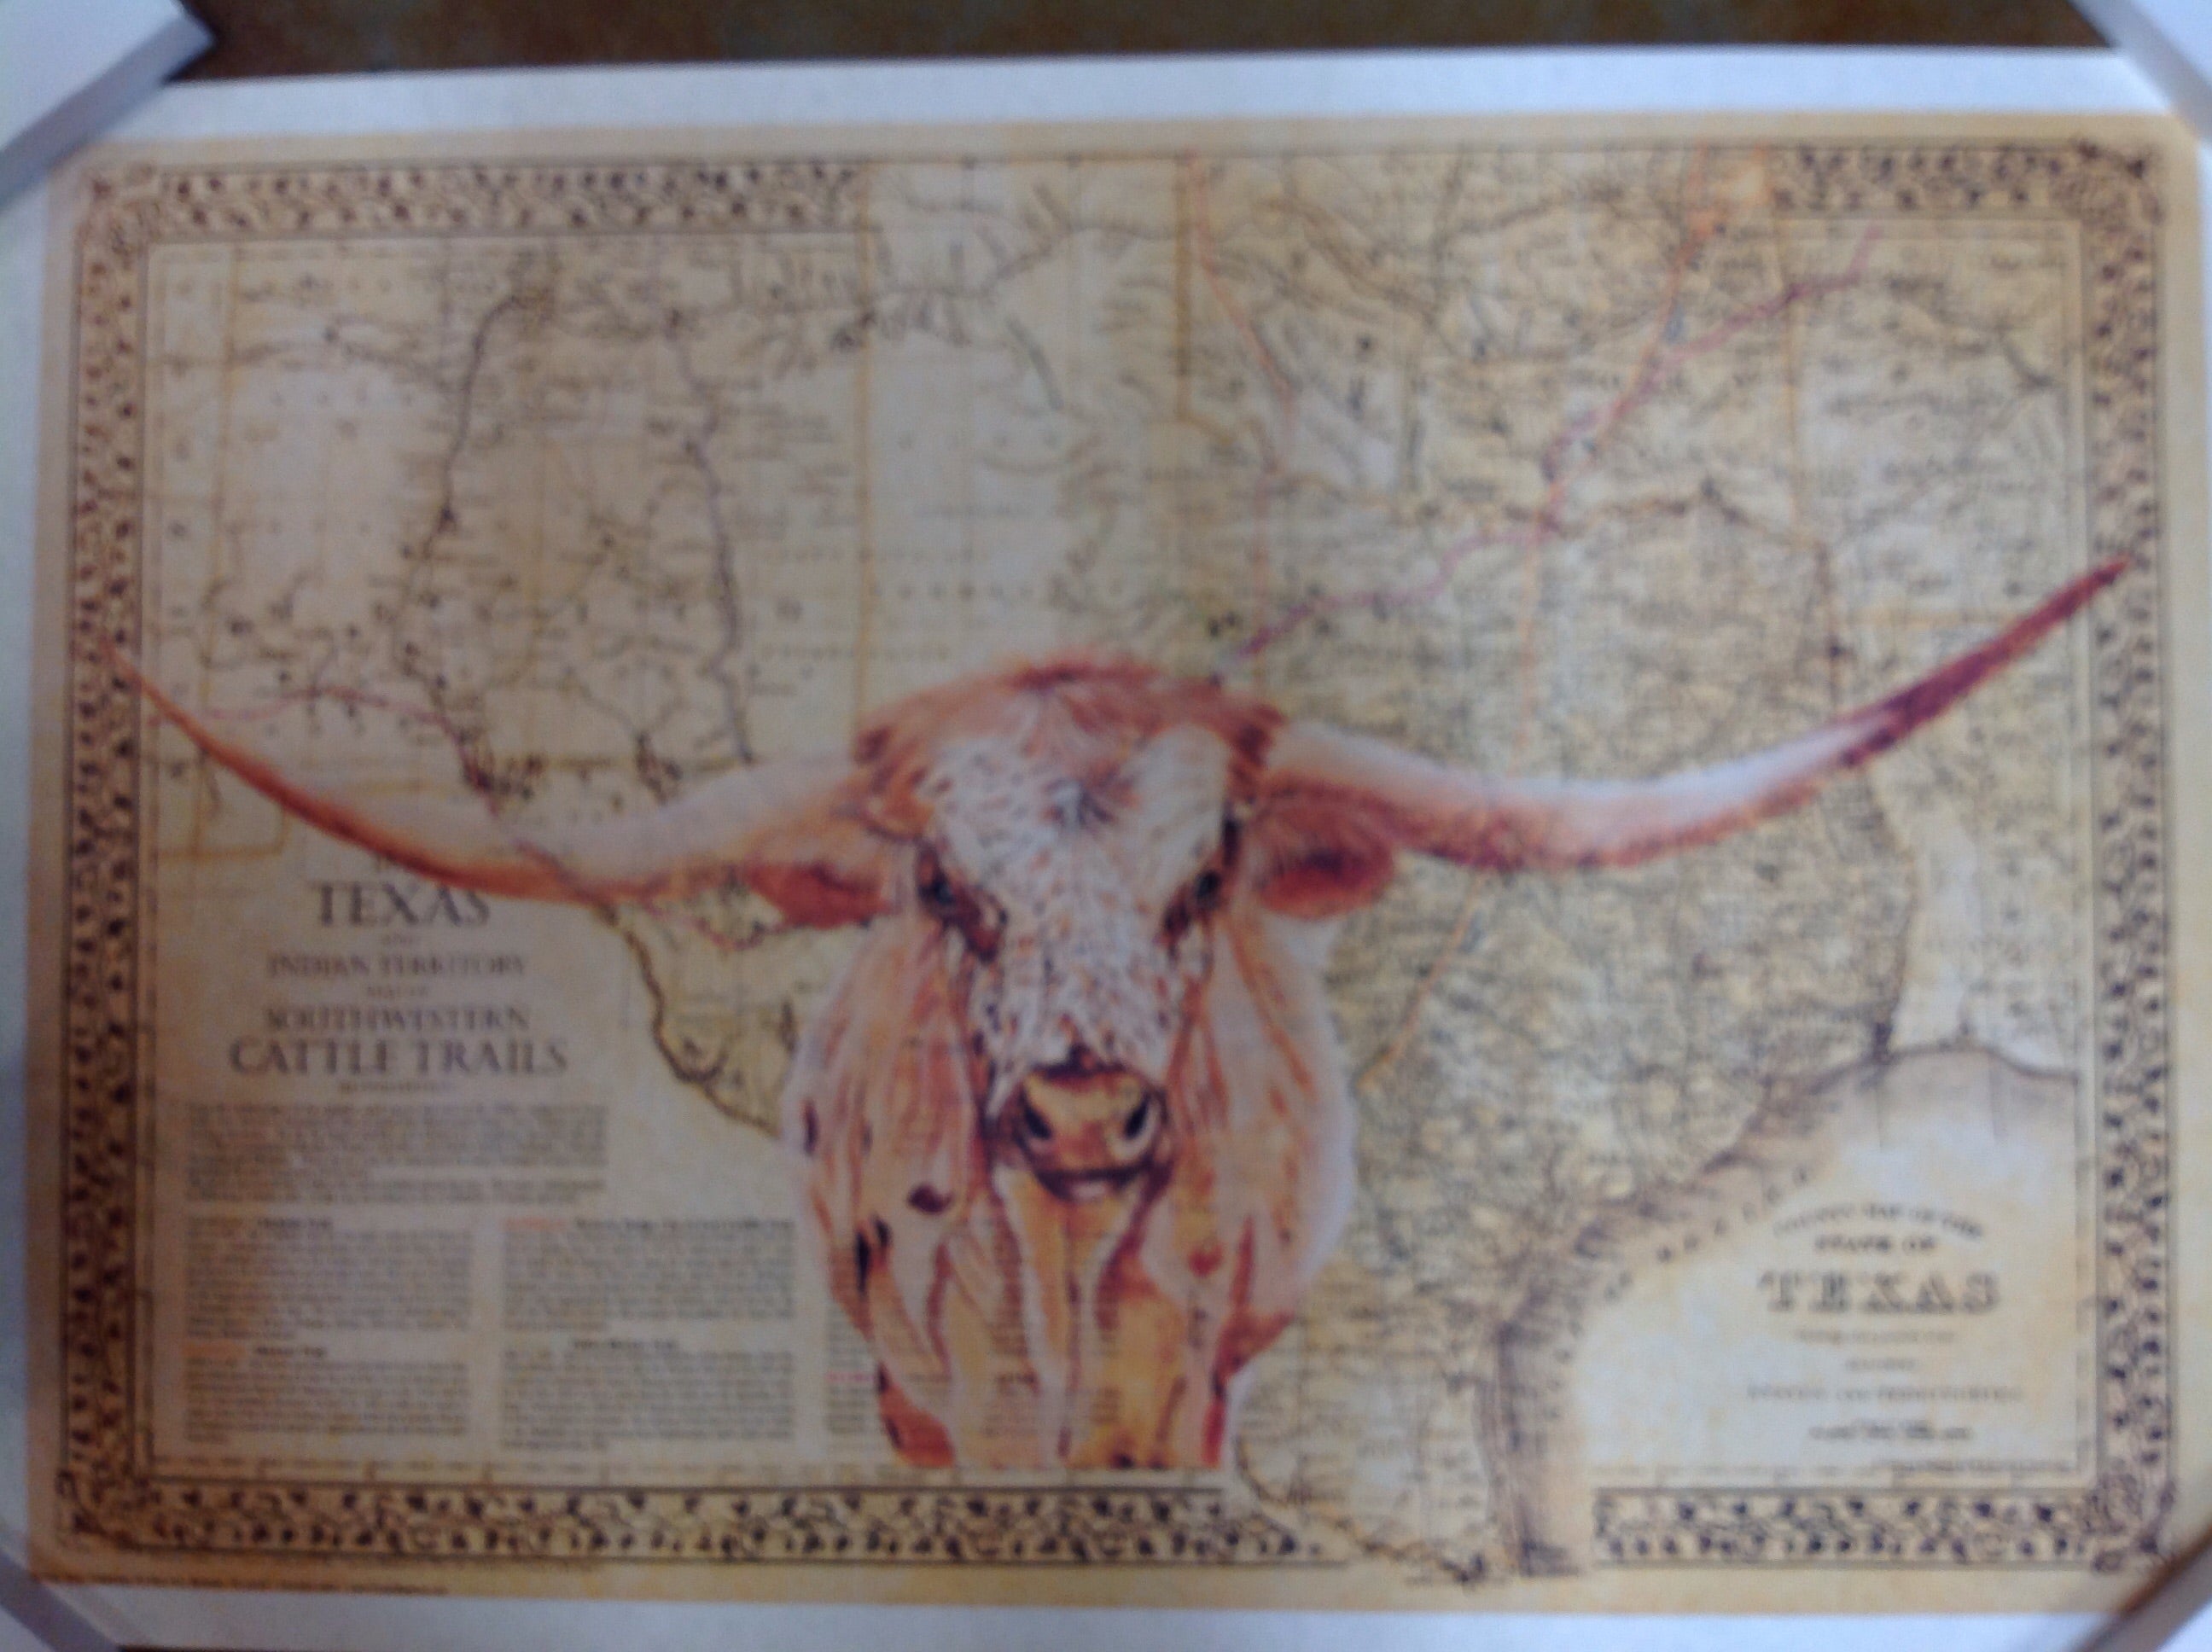 1876 Texas and Indian Territory Cattle Trails